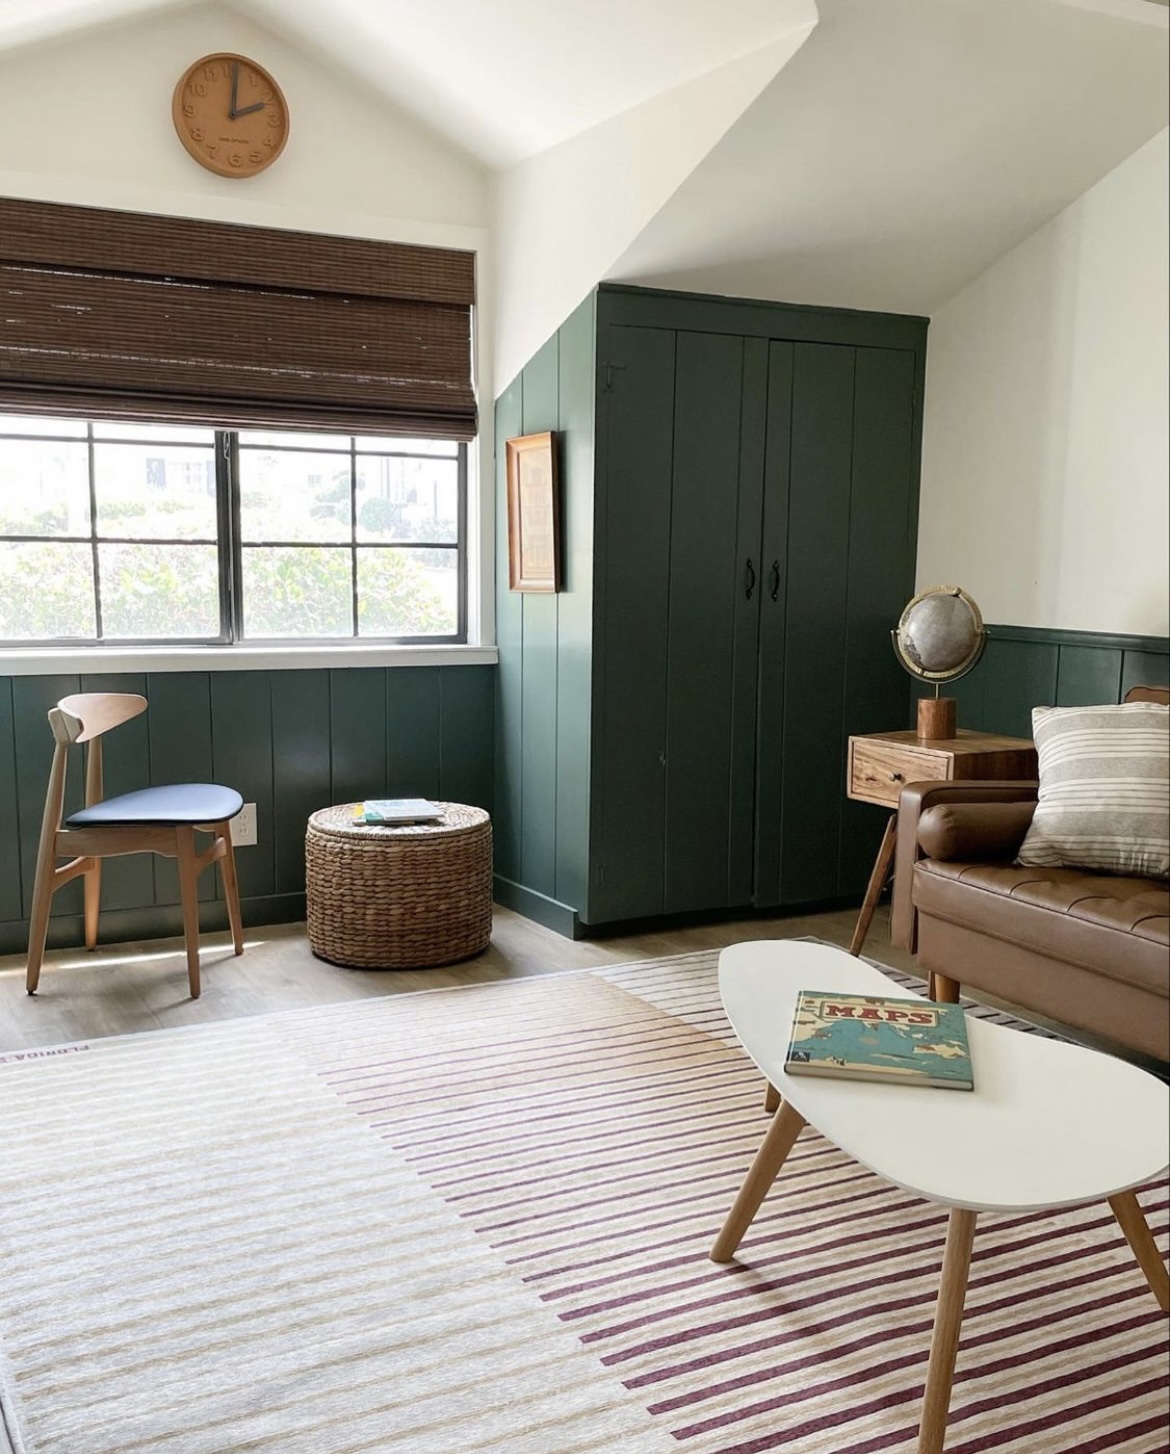 vertical shiplap, green paint, green playroom, kids playroom, wooden woven shades, 1950 beach cottage, modern traditional home, wicker ottoman, globe, brown leather couch, modern coffee table, shared kids bedroom, playroom ideas, playroom inspo